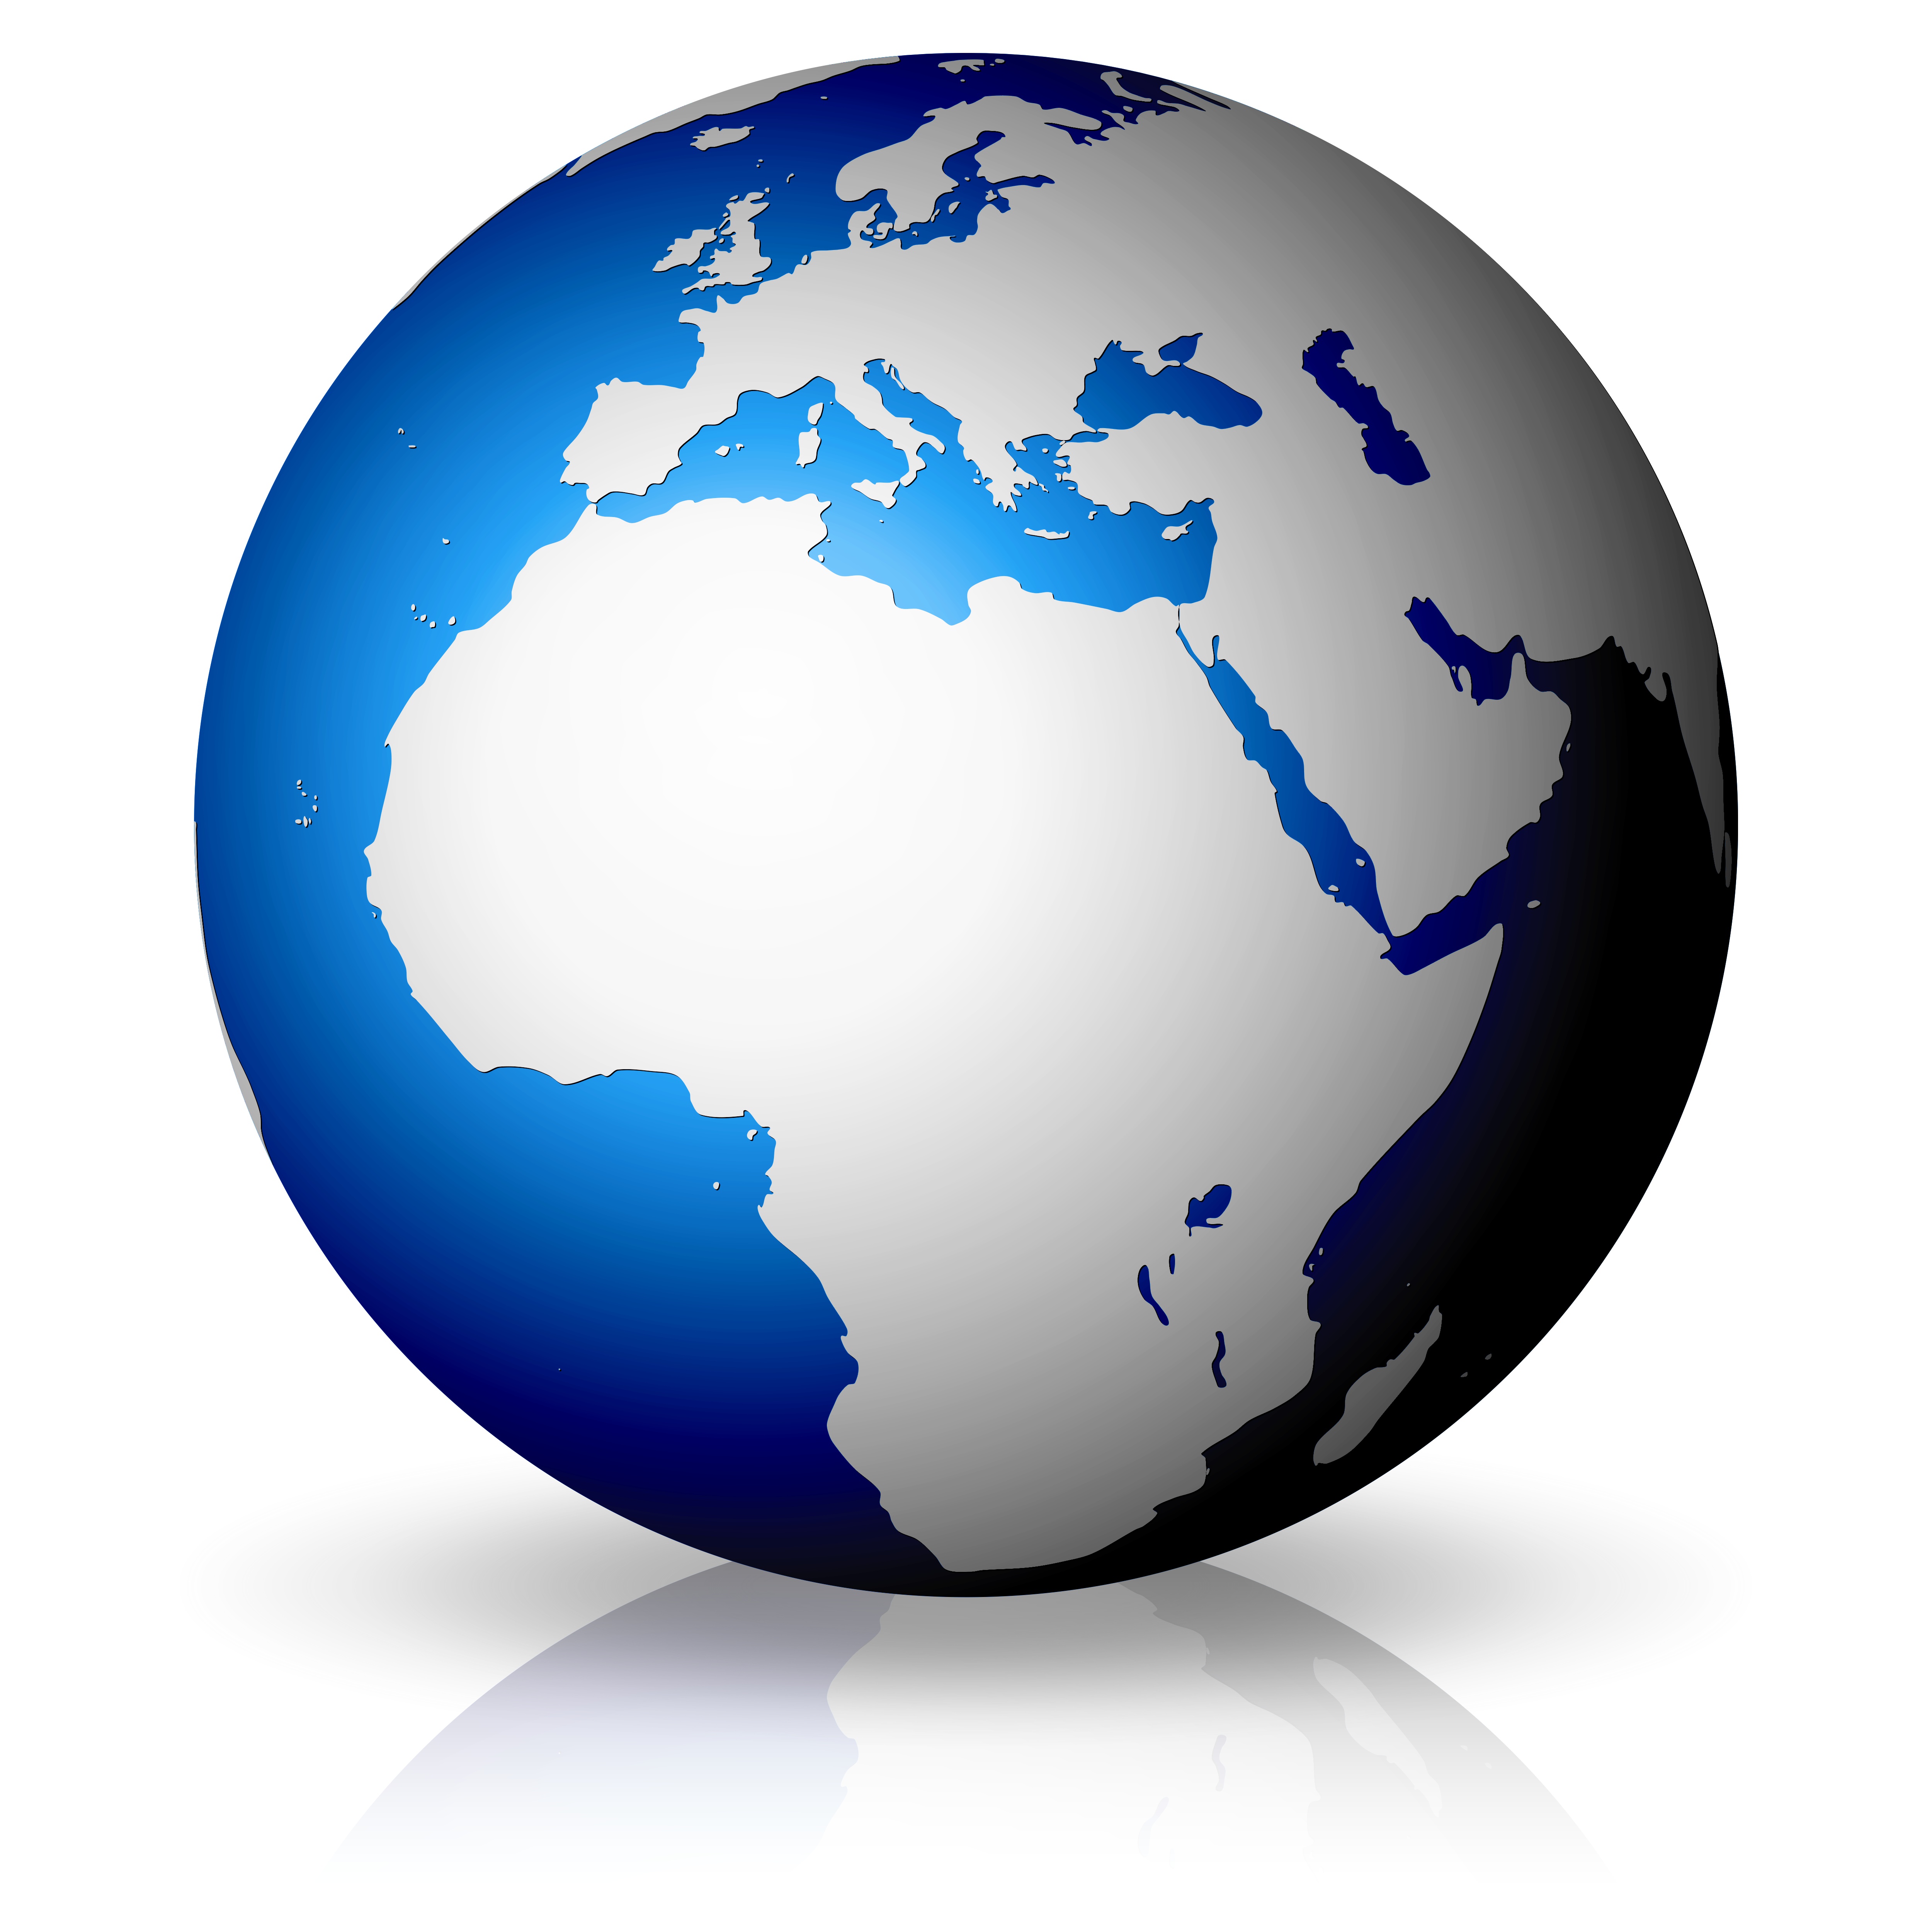 Pictures Of The Globe Of Earth - ClipArt Best